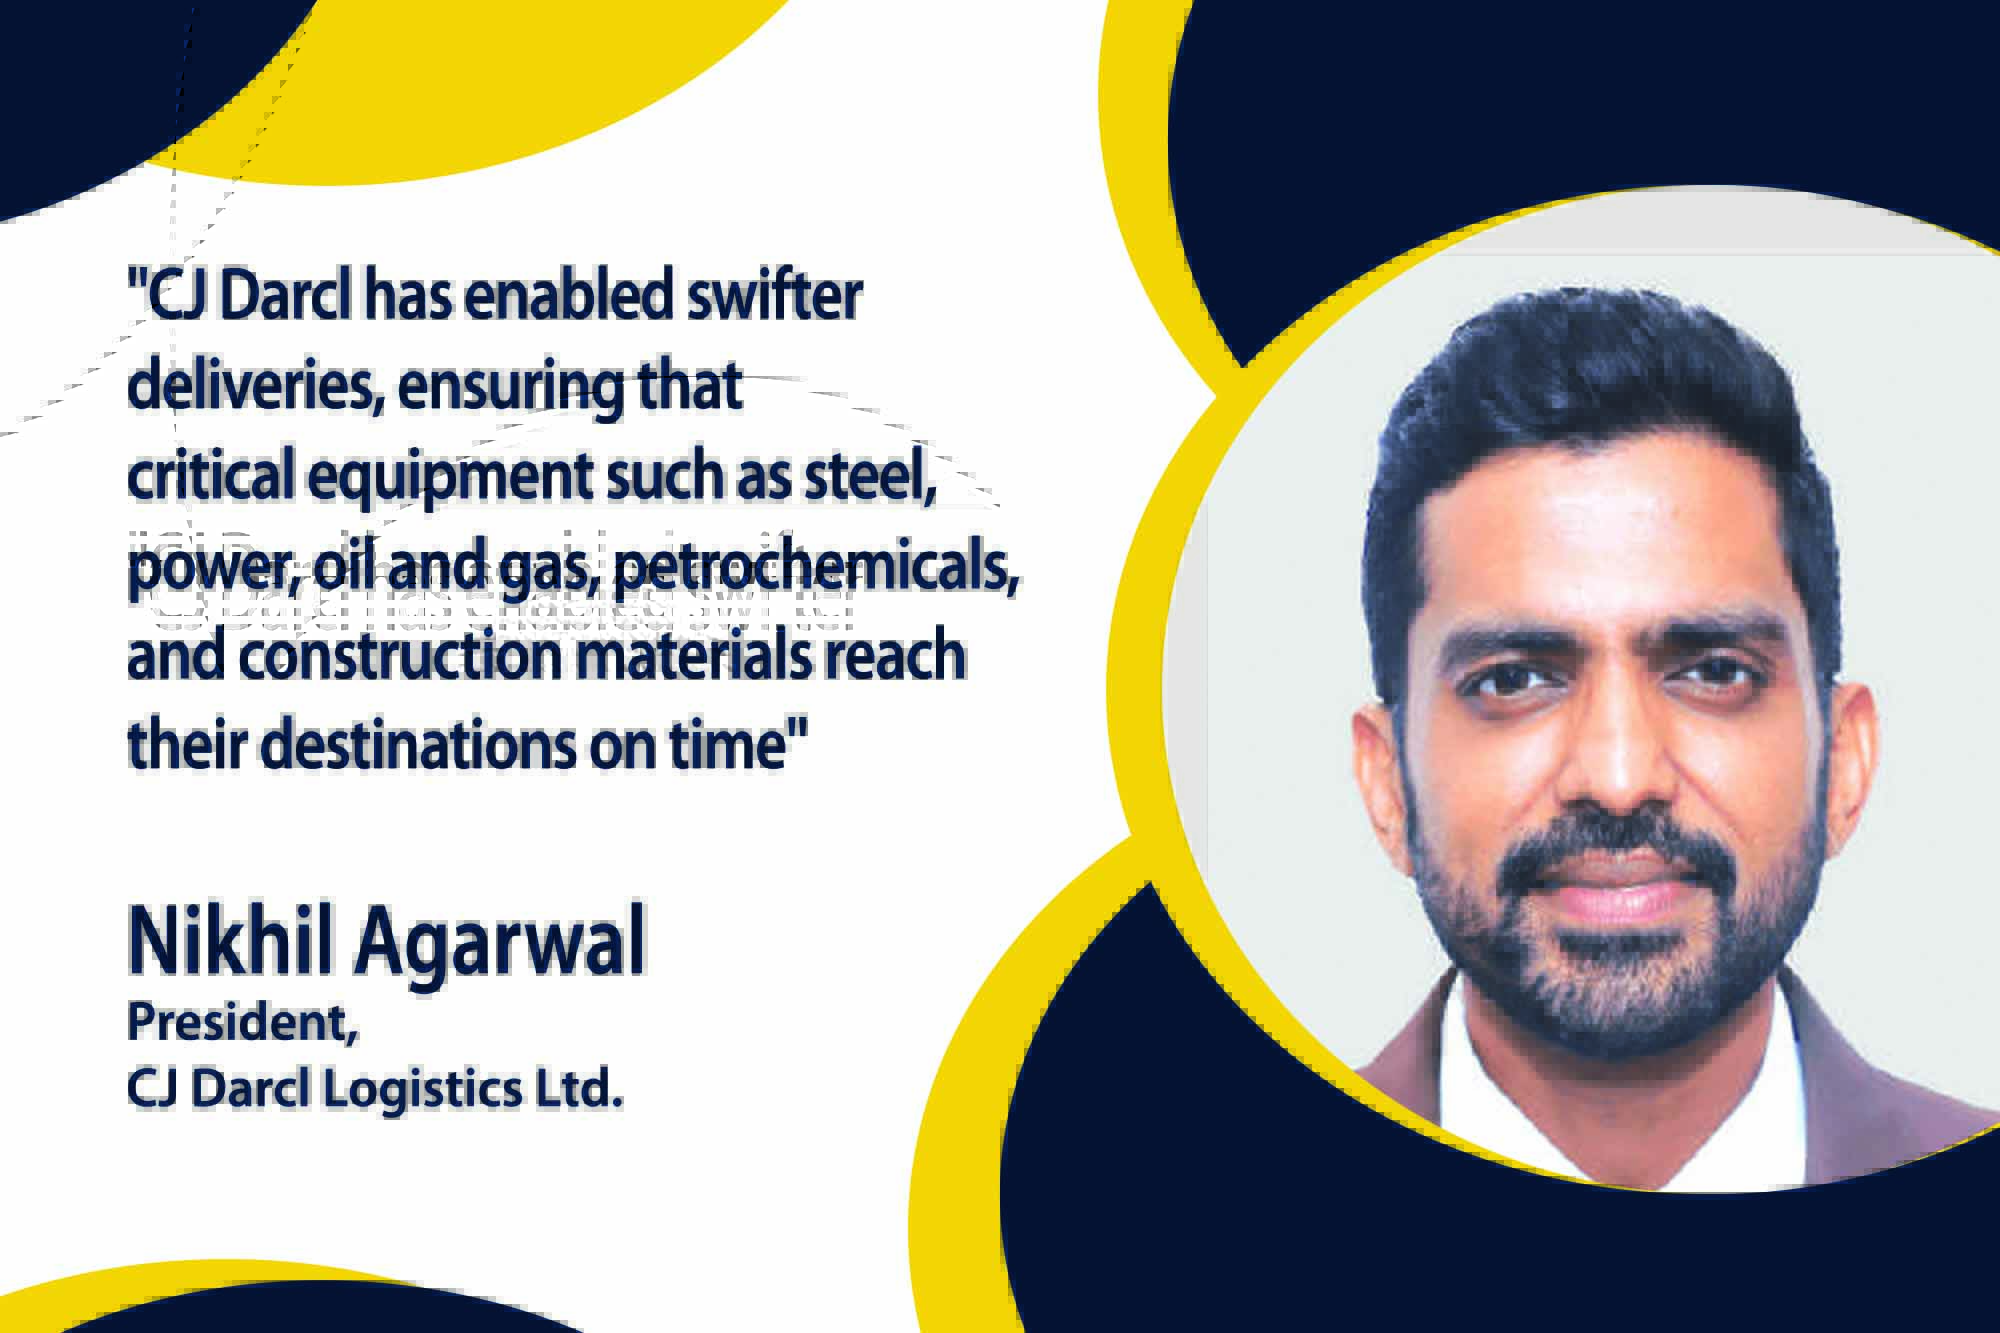 In an exclusive interview with Nikhil Agarwal, President of CJ Darcl Logistics Ltd., we delve into the company's pivotal role in driving the logistics sector's growth amidst India's evolving needs and anticipated GDP growth.